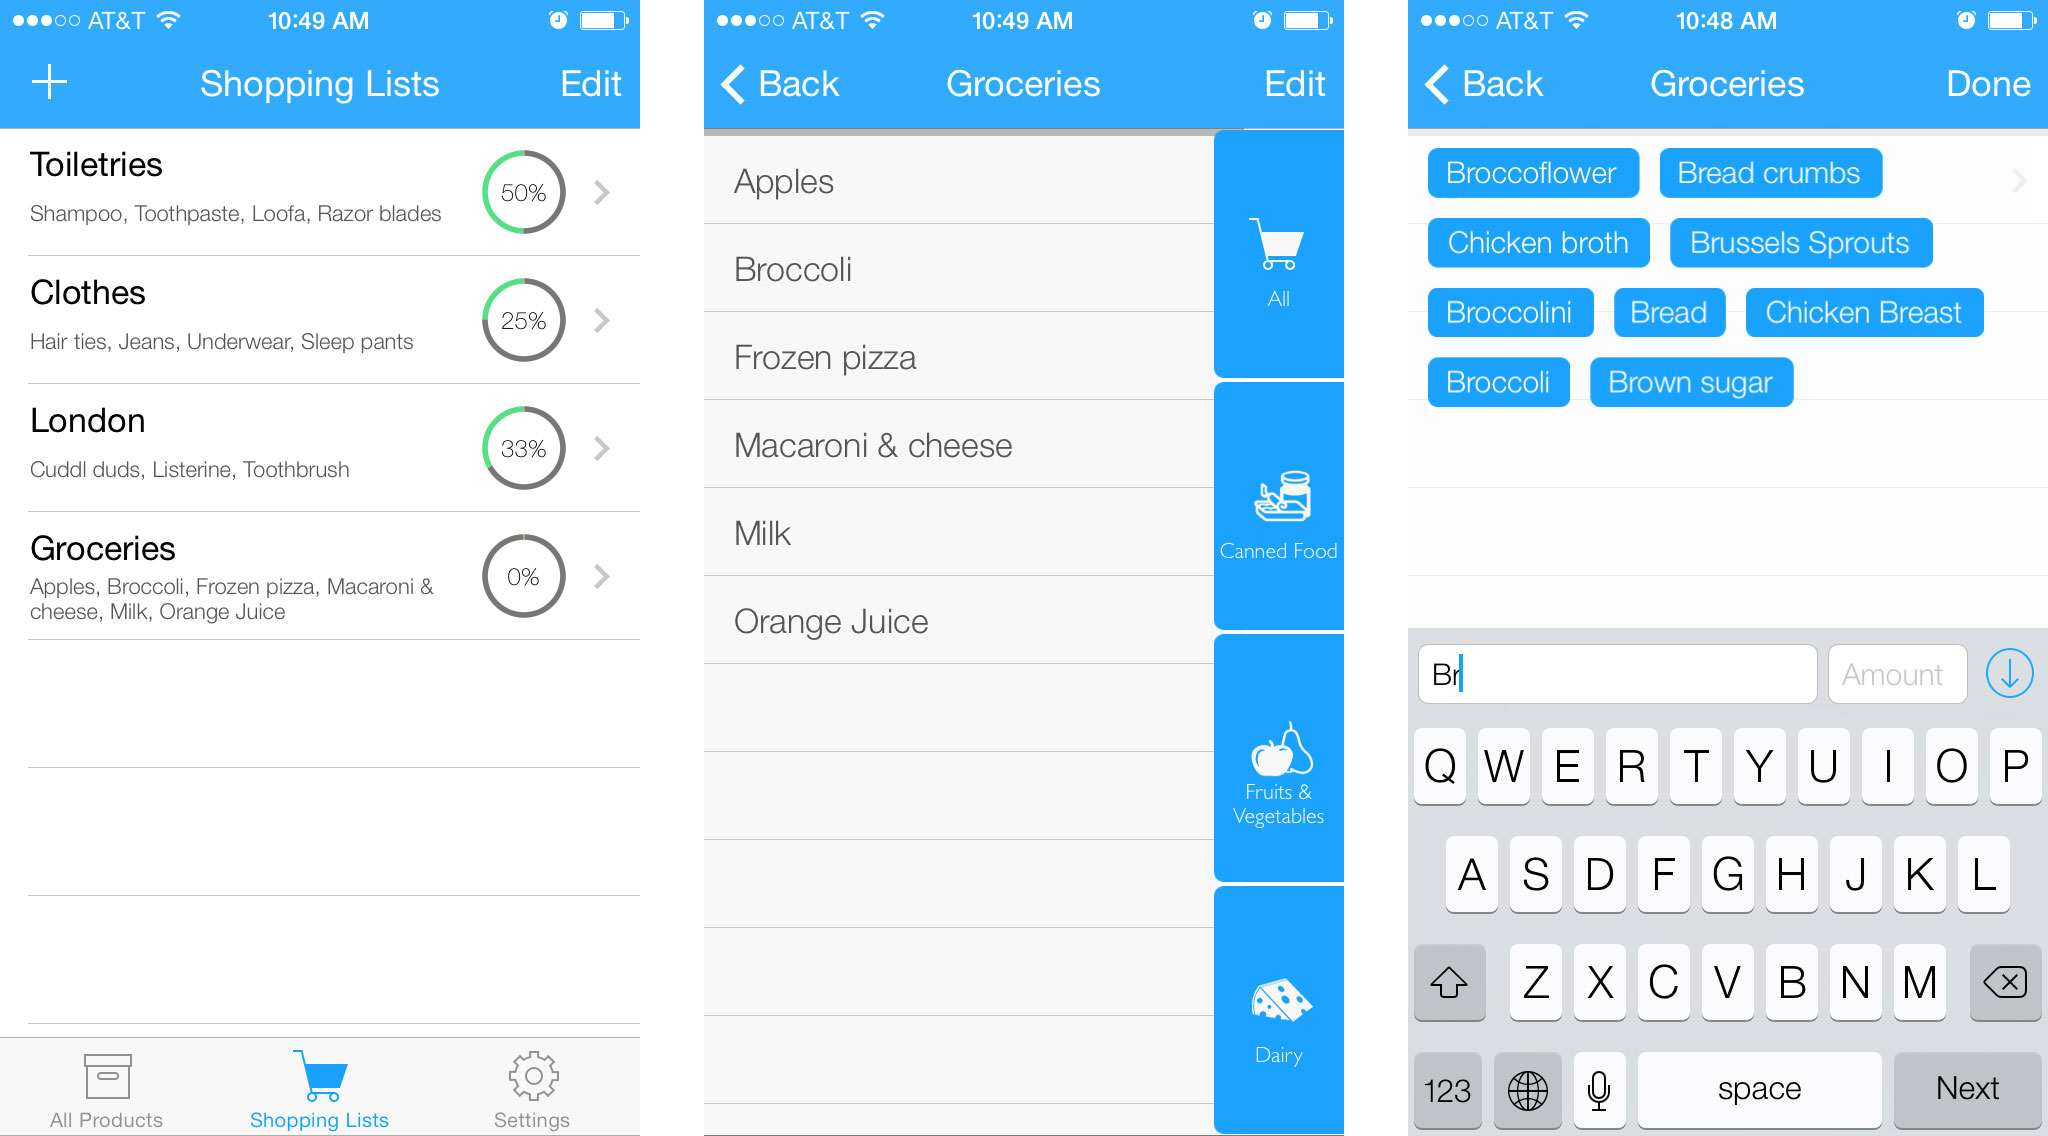 45 Best Pictures Grocery List App Shared : Best shopping and grocery list apps for iPhone: Pushpins ...